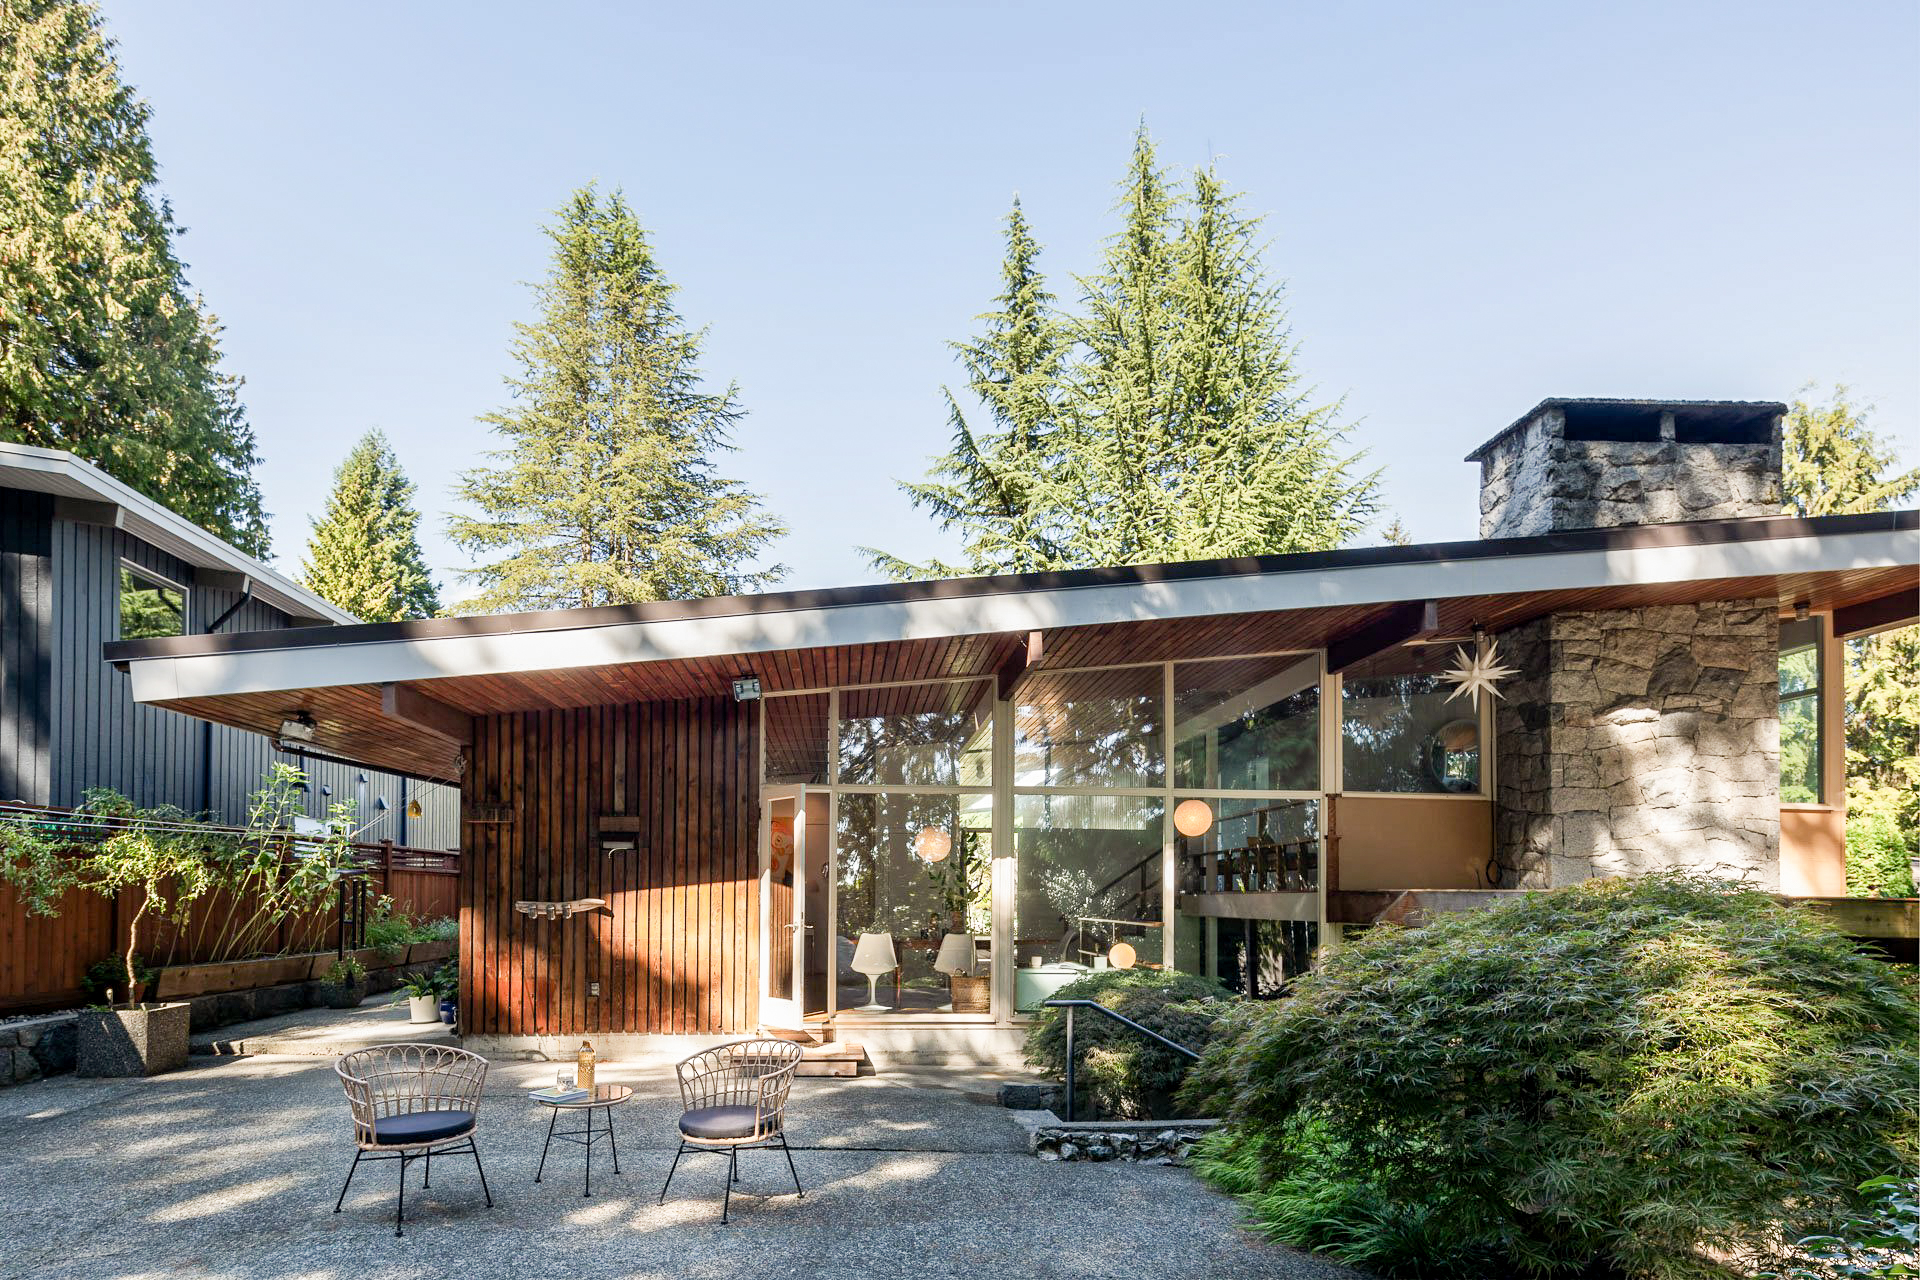 661 East Windsor Road, North Vancouver - sold west coast modern - photo 2